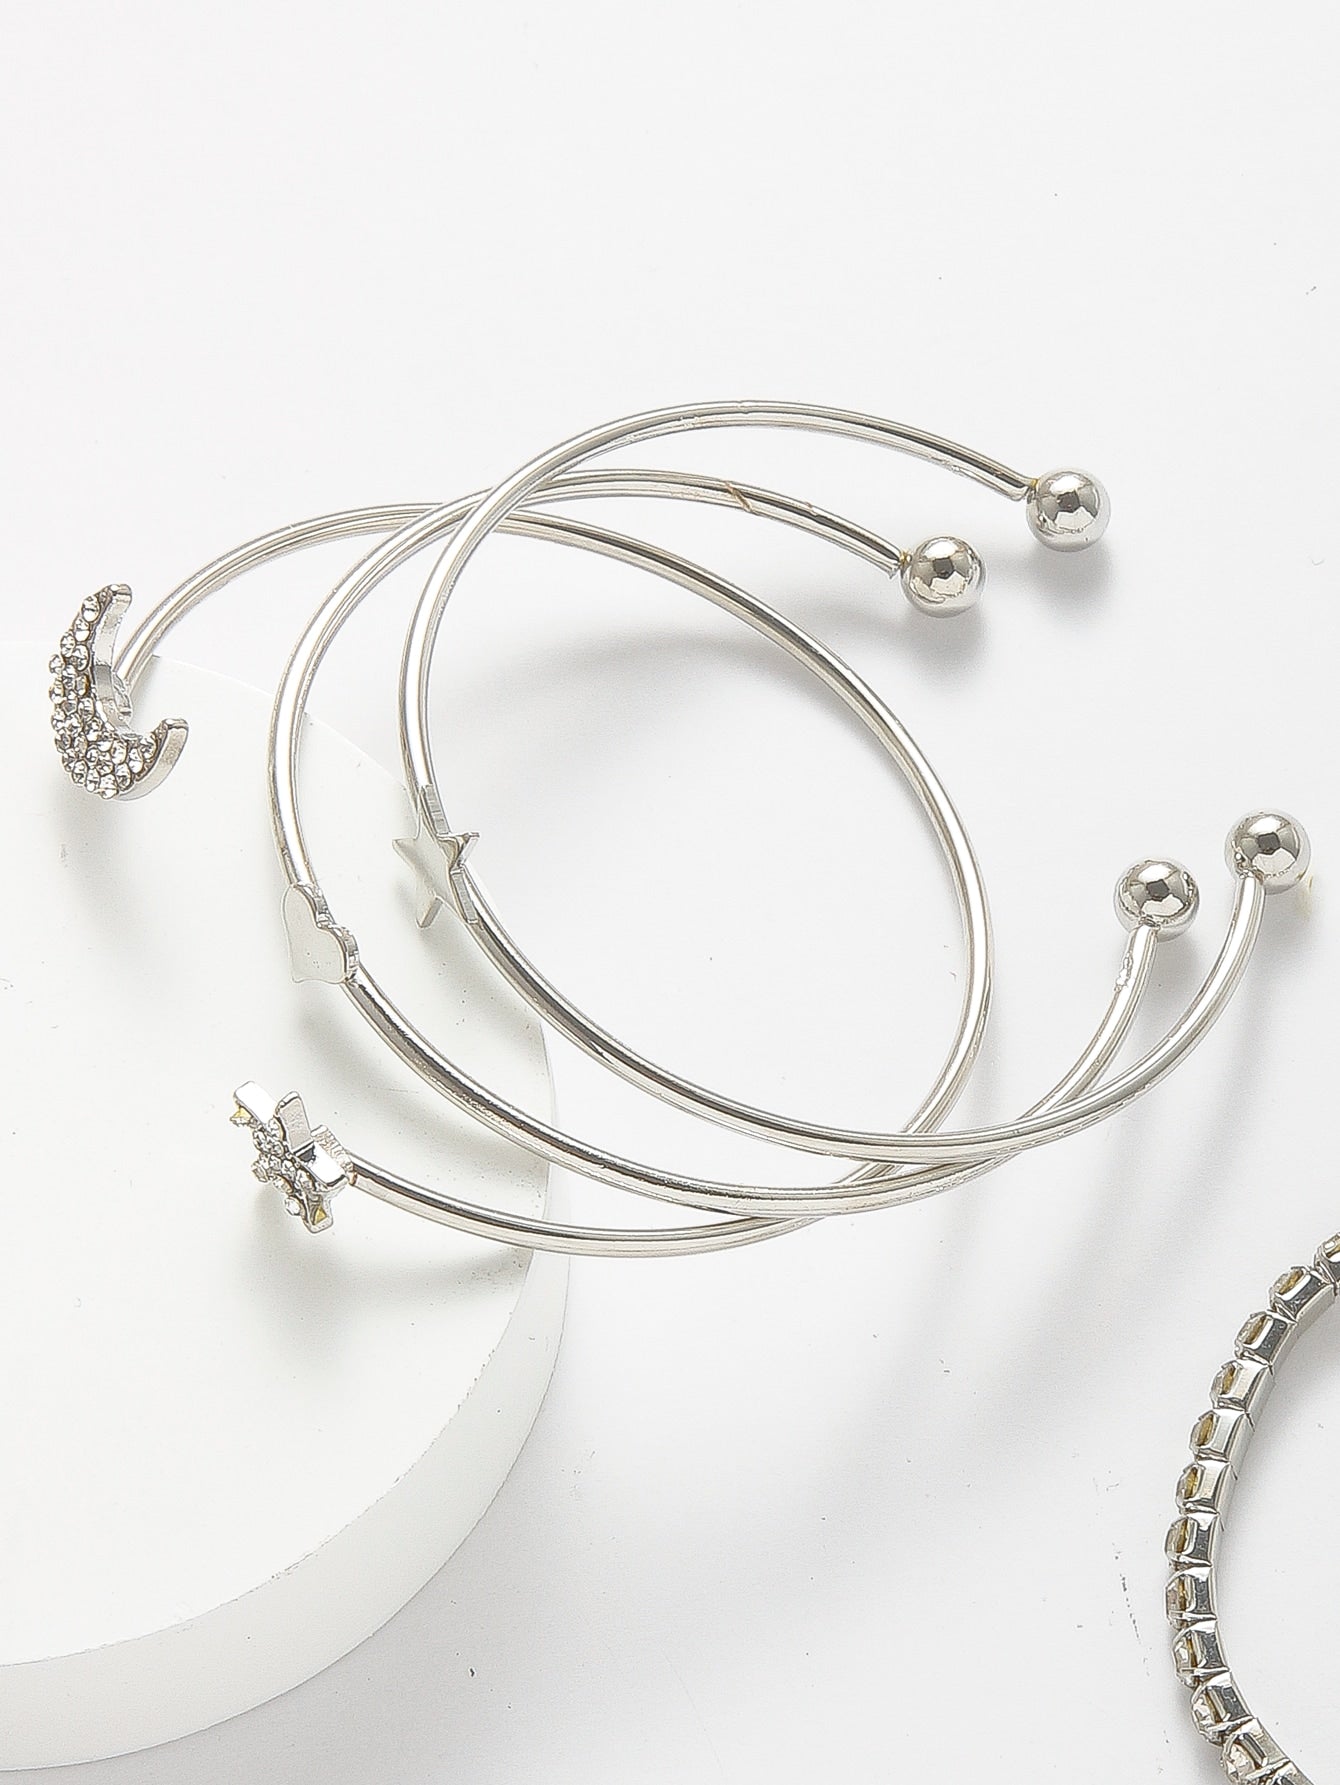 STAR AND MOON BANGLE 4 PIECE SILVER